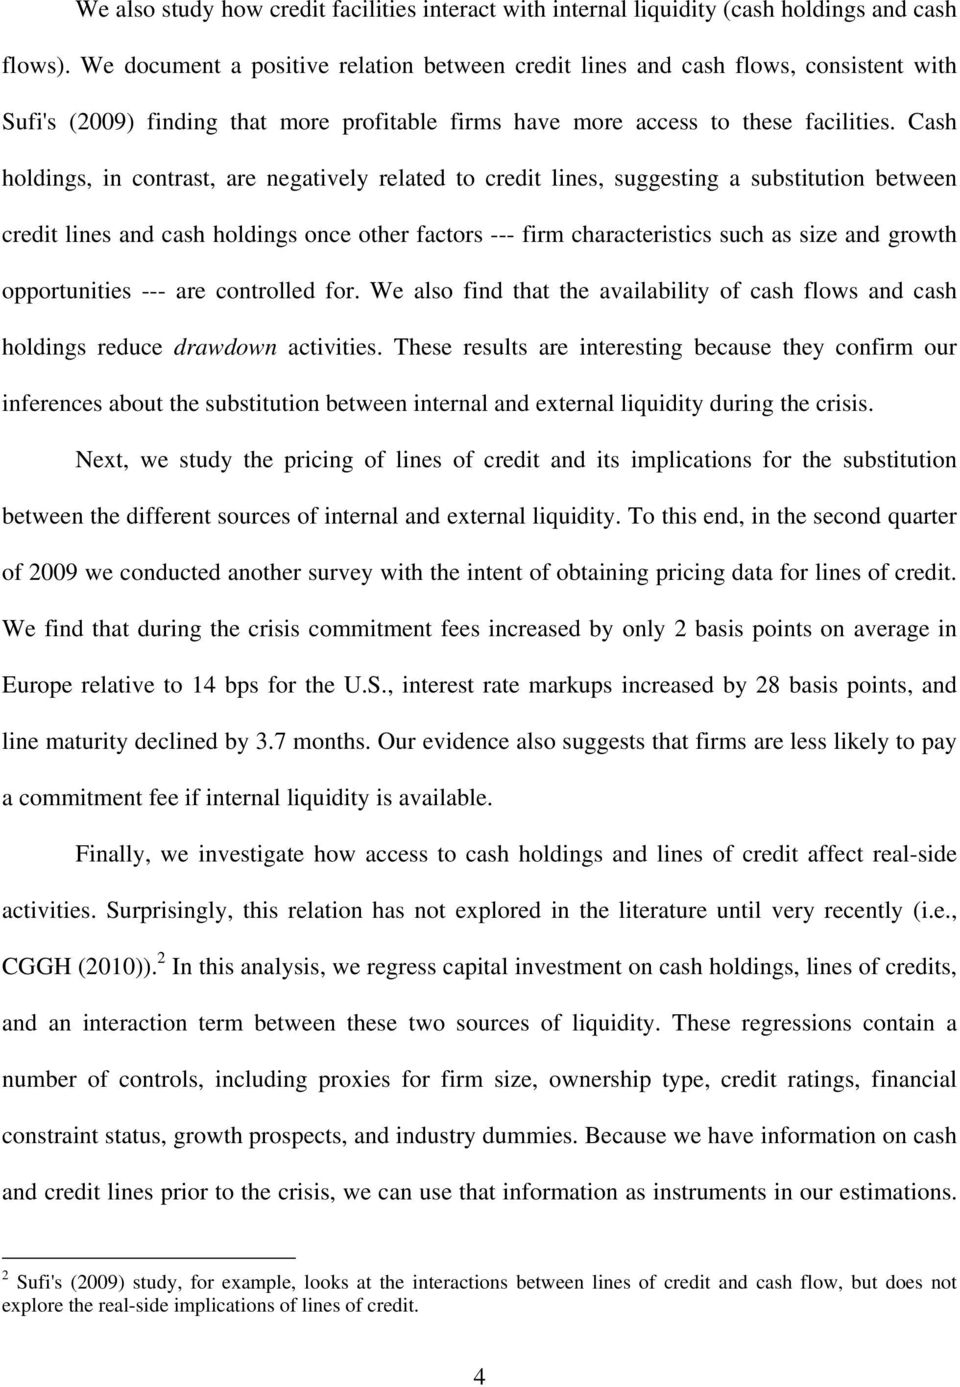 Cash holdings, in contrast, are negatively related to credit lines, suggesting a substitution between credit lines and cash holdings once other factors --- firm characteristics such as size and